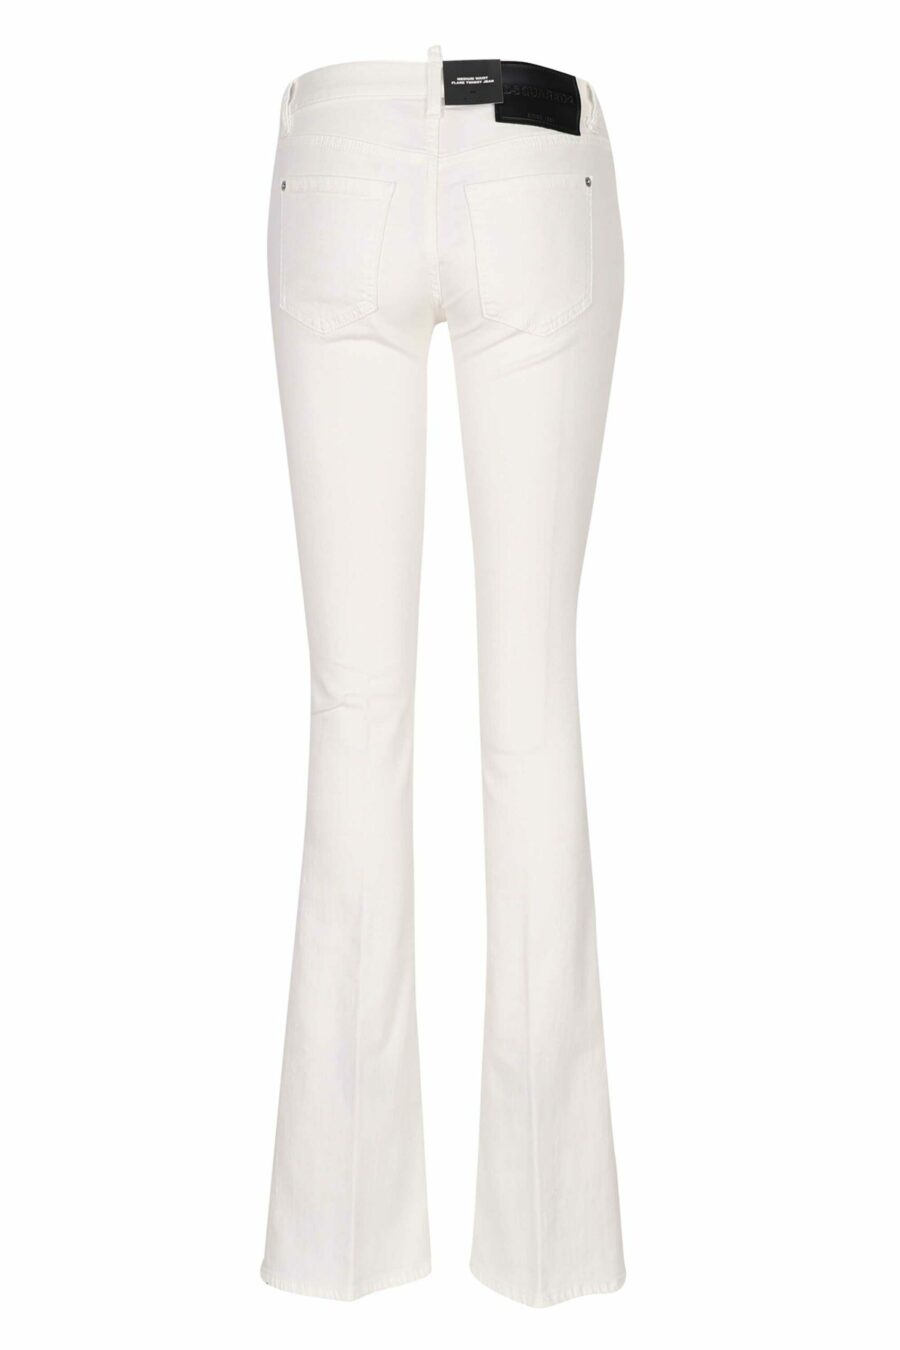 White "twiggy jean" jeans with wide boot - 8054148307912 2 scaled